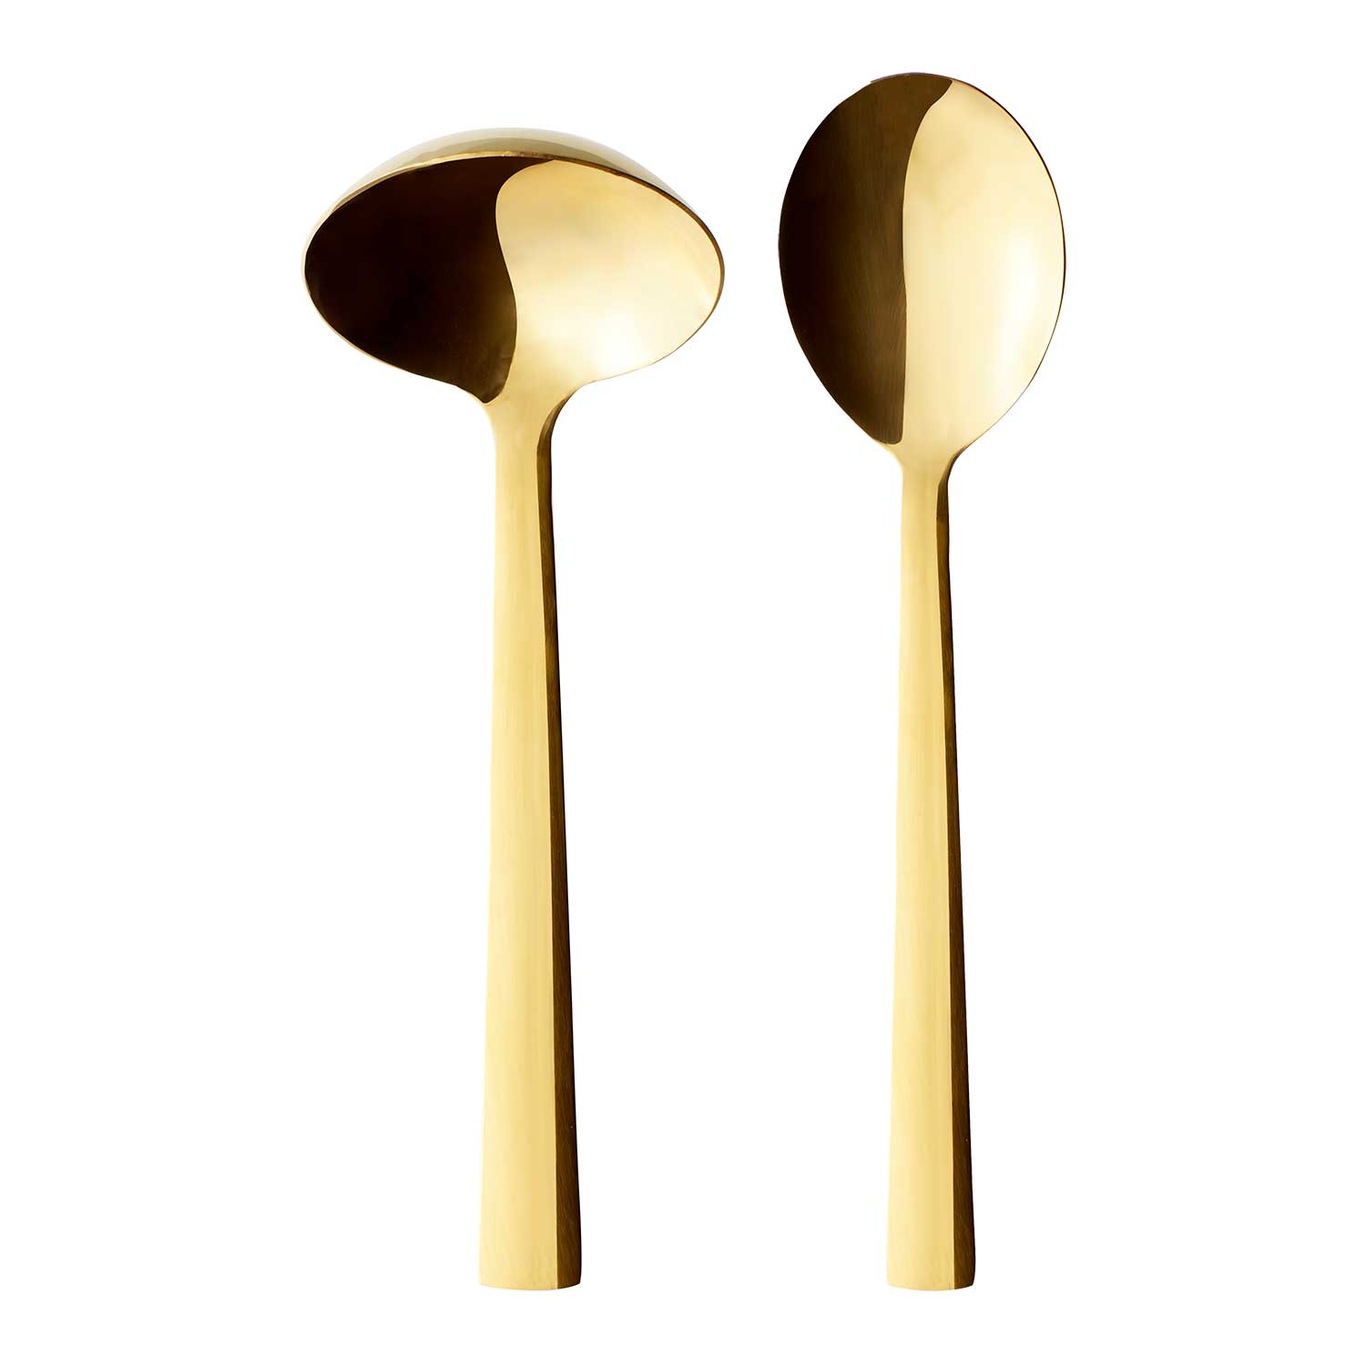 Raw Sauce Ladle & Serving Spoon, Gold